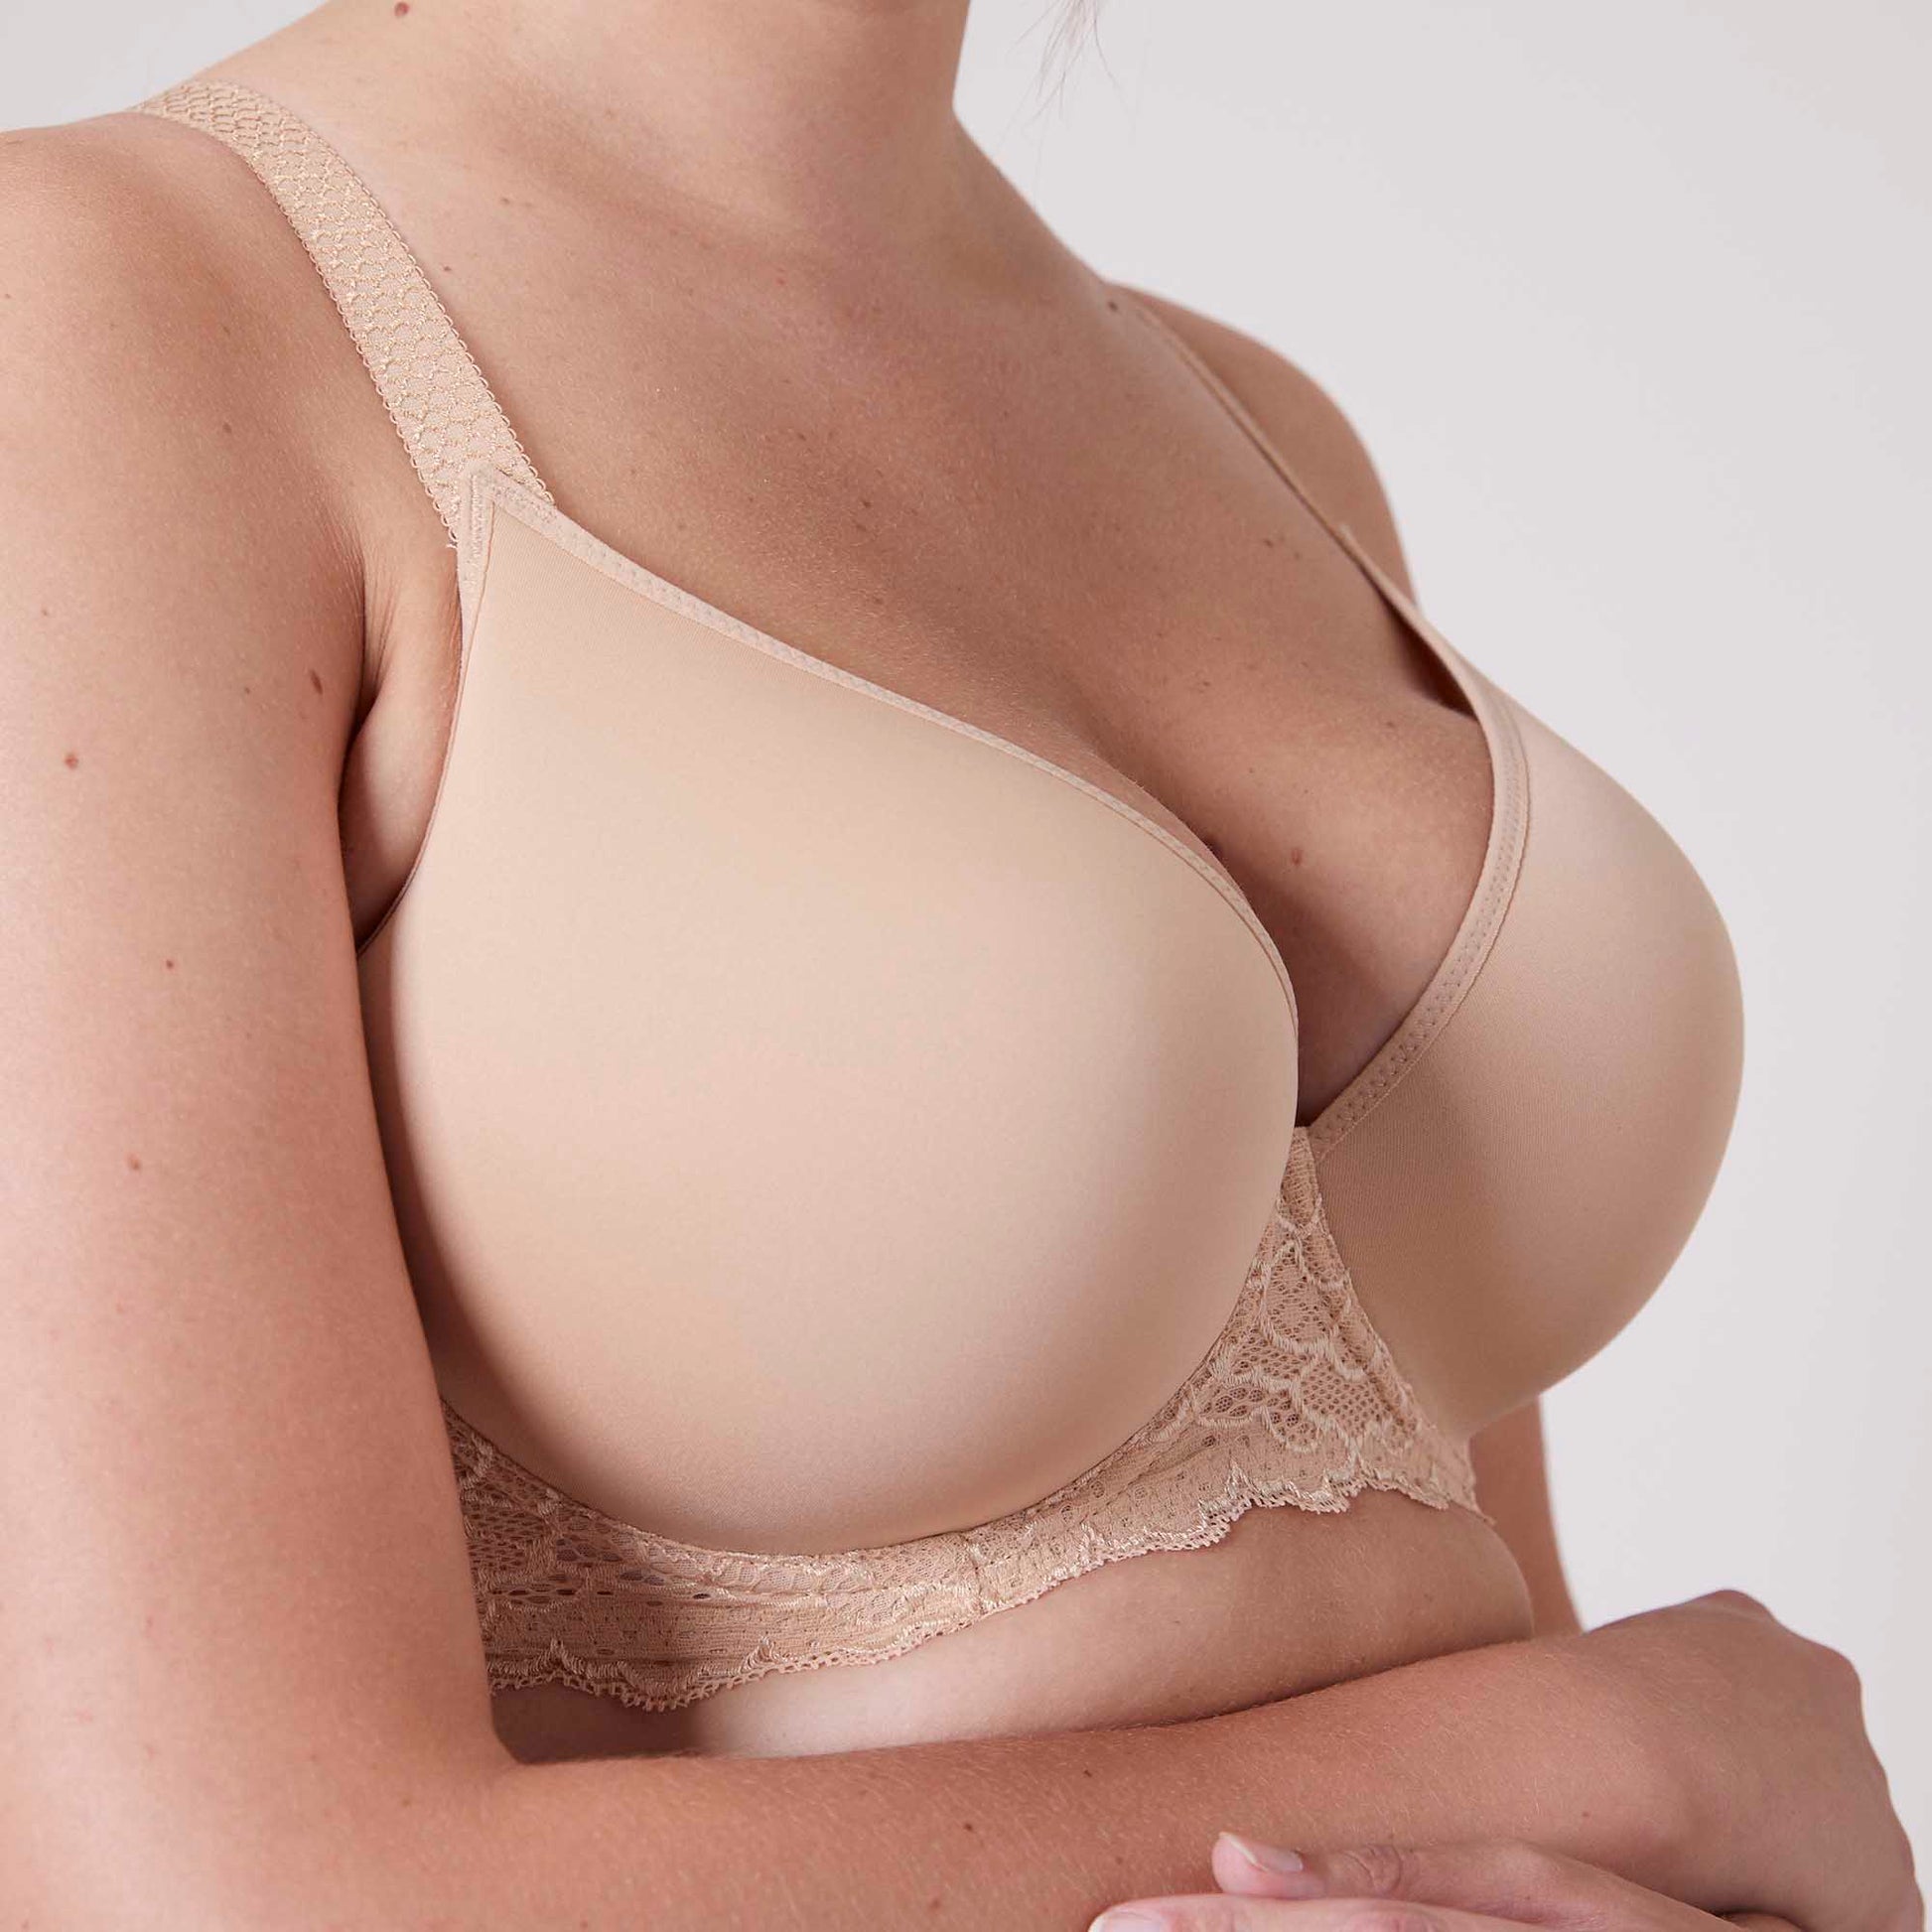 Caresse 3D Spacer Plunge Bra In Teaberry Pink - Simone Perele